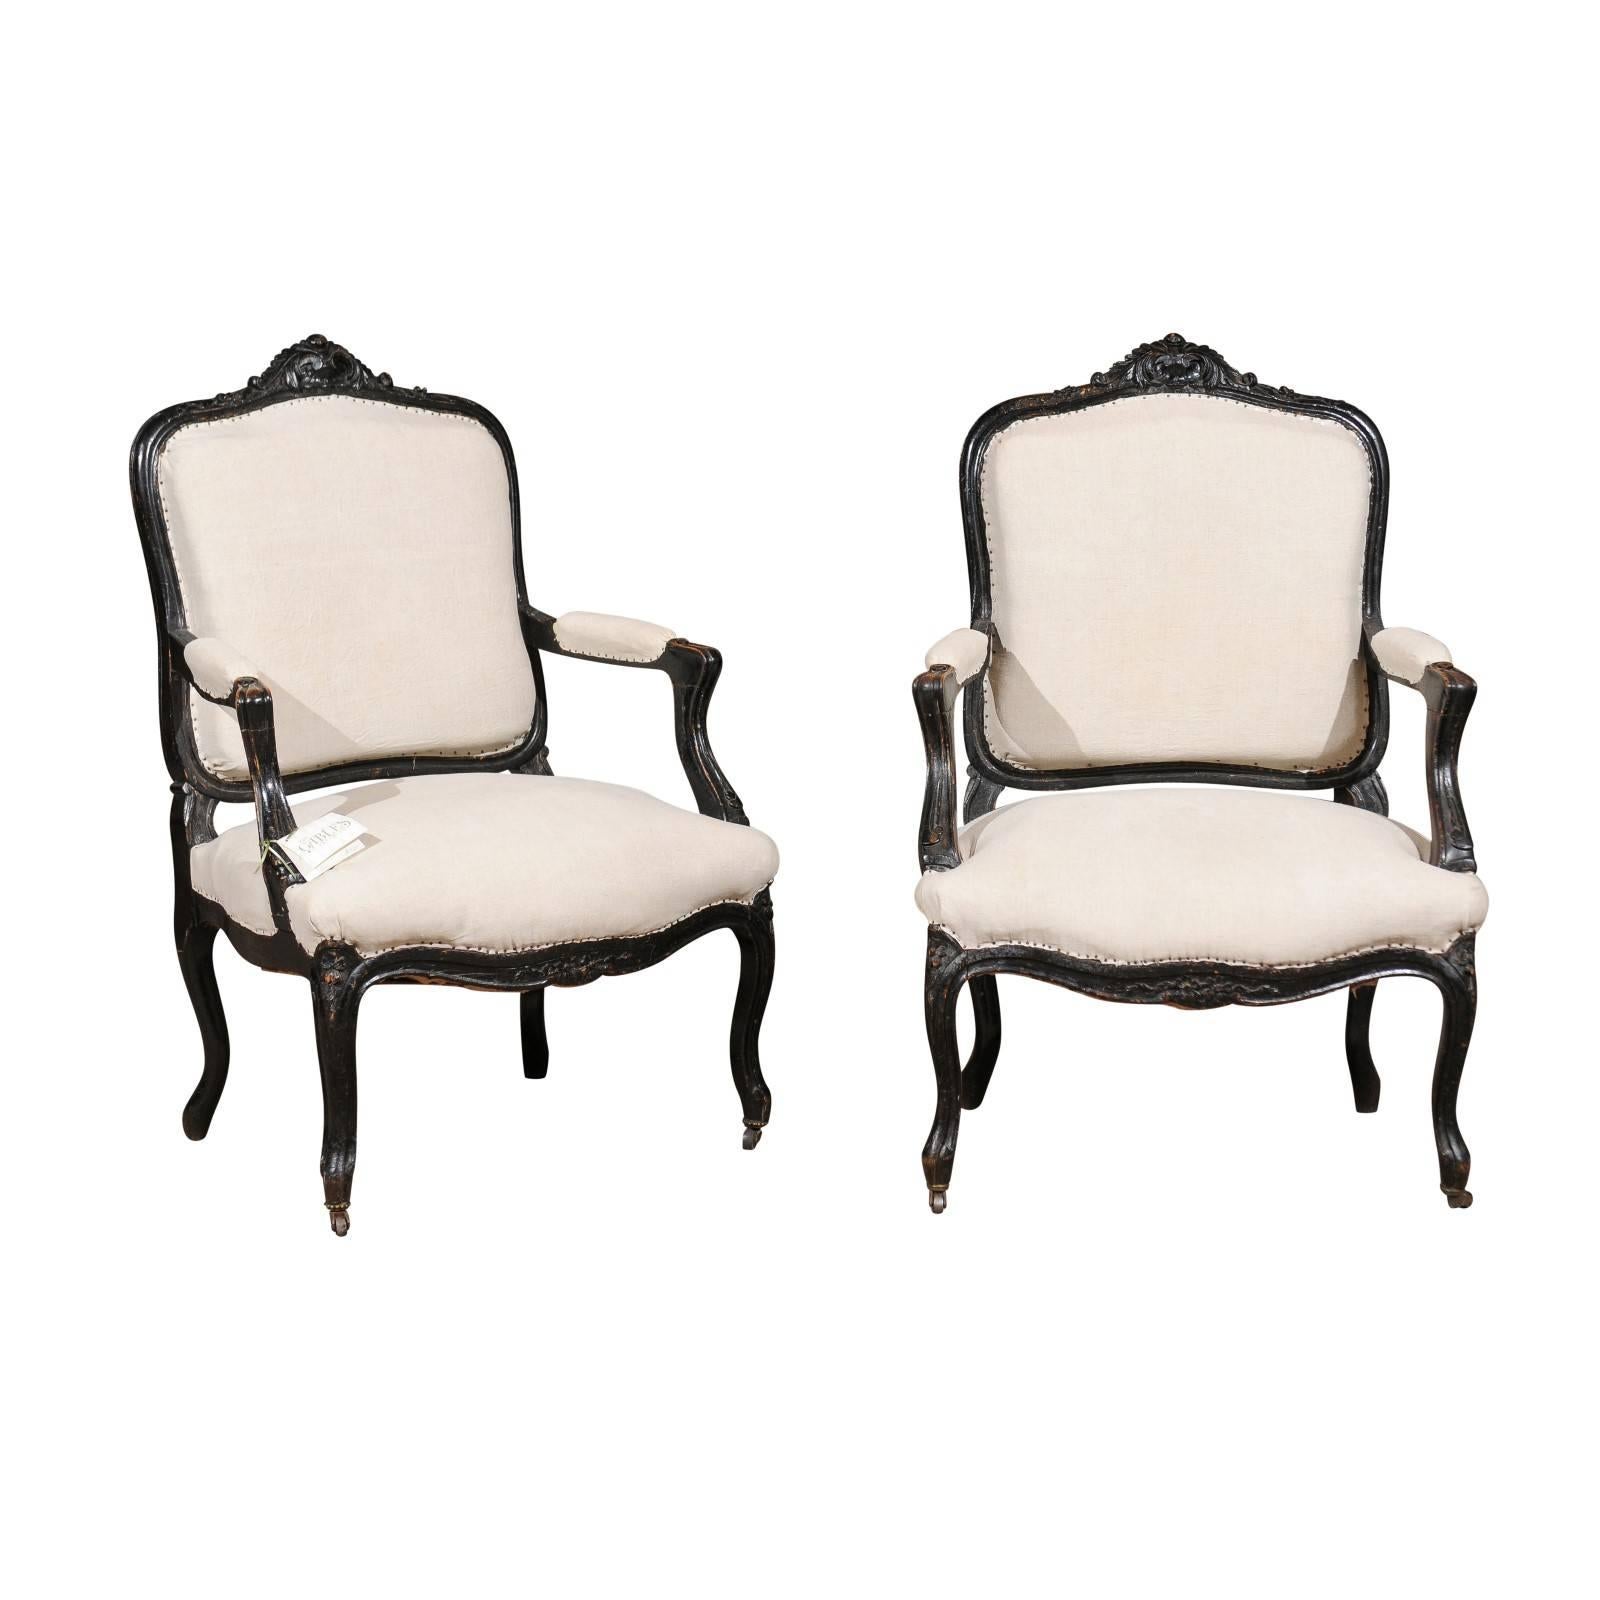 Pair of 19th Century Black Louis XVth Style Armchairs, circa 1880 For Sale